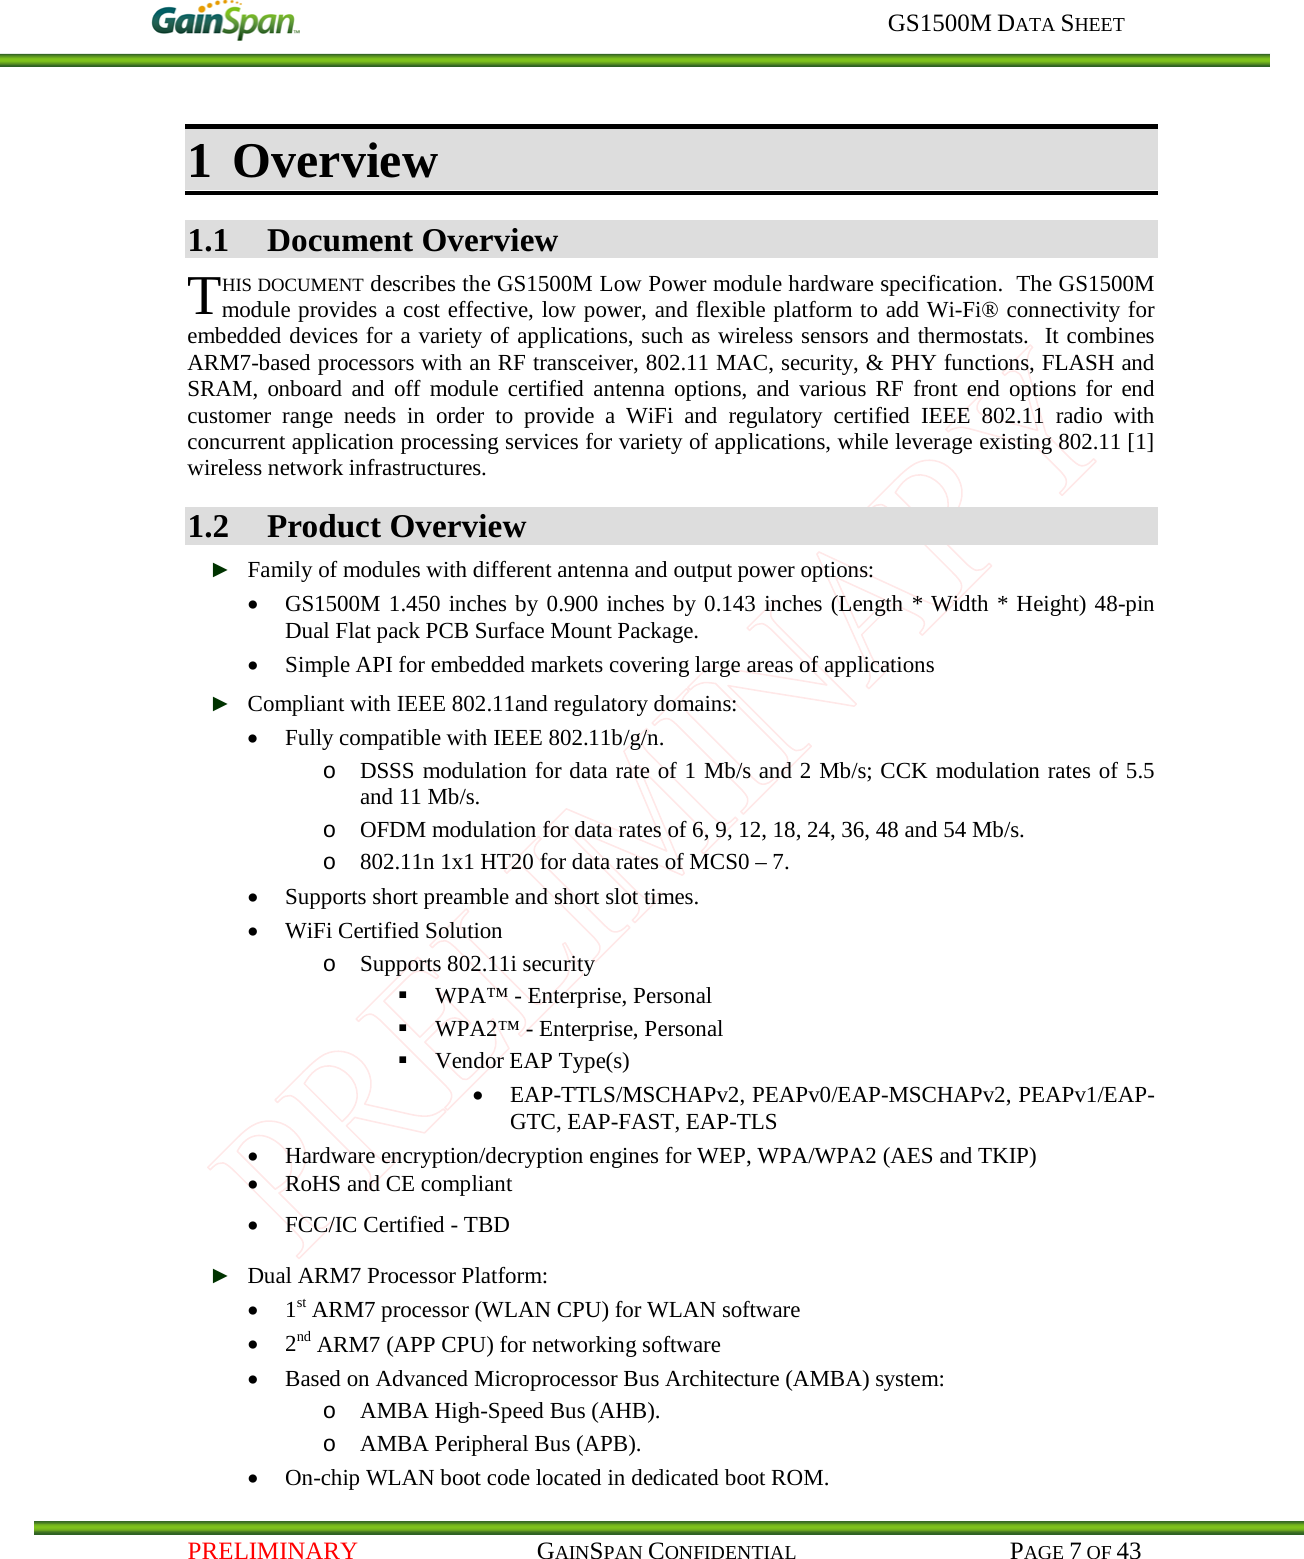     GS1500M DATA SHEET   PRELIMINARY                                    GAINSPAN CONFIDENTIAL                                           PAGE 7 OF 43 1 Overview 1.1 Document Overview HIS DOCUMENT describes the GS1500M Low Power module hardware specification.  The GS1500M module provides a cost effective, low power, and flexible platform to add Wi-Fi® connectivity for embedded devices for a variety of applications, such as wireless sensors and thermostats.  It combines ARM7-based processors with an RF transceiver, 802.11 MAC, security, &amp; PHY functions, FLASH and SRAM,  onboard and off module certified antenna options, and various RF front end options for end customer range needs in order to provide a WiFi and regulatory certified IEEE 802.11 radio with concurrent application processing services for variety of applications, while leverage existing 802.11 [1] wireless network infrastructures. 1.2 Product Overview ► Family of modules with different antenna and output power options: • GS1500M 1.450 inches by 0.900 inches by 0.143 inches (Length * Width * Height) 48-pin Dual Flat pack PCB Surface Mount Package. • Simple API for embedded markets covering large areas of applications ► Compliant with IEEE 802.11and regulatory domains: • Fully compatible with IEEE 802.11b/g/n. o DSSS modulation for data rate of 1 Mb/s and 2 Mb/s; CCK modulation rates of 5.5 and 11 Mb/s. o OFDM modulation for data rates of 6, 9, 12, 18, 24, 36, 48 and 54 Mb/s. o 802.11n 1x1 HT20 for data rates of MCS0 – 7. • Supports short preamble and short slot times. • WiFi Certified Solution o Supports 802.11i security  WPA™ - Enterprise, Personal  WPA2™ - Enterprise, Personal  Vendor EAP Type(s) • EAP-TTLS/MSCHAPv2, PEAPv0/EAP-MSCHAPv2, PEAPv1/EAP-GTC, EAP-FAST, EAP-TLS • Hardware encryption/decryption engines for WEP, WPA/WPA2 (AES and TKIP) • RoHS and CE compliant • FCC/IC Certified - TBD ► Dual ARM7 Processor Platform: • 1st ARM7 processor (WLAN CPU) for WLAN software • 2nd ARM7 (APP CPU) for networking software  • Based on Advanced Microprocessor Bus Architecture (AMBA) system: o AMBA High-Speed Bus (AHB). o AMBA Peripheral Bus (APB). • On-chip WLAN boot code located in dedicated boot ROM. T 